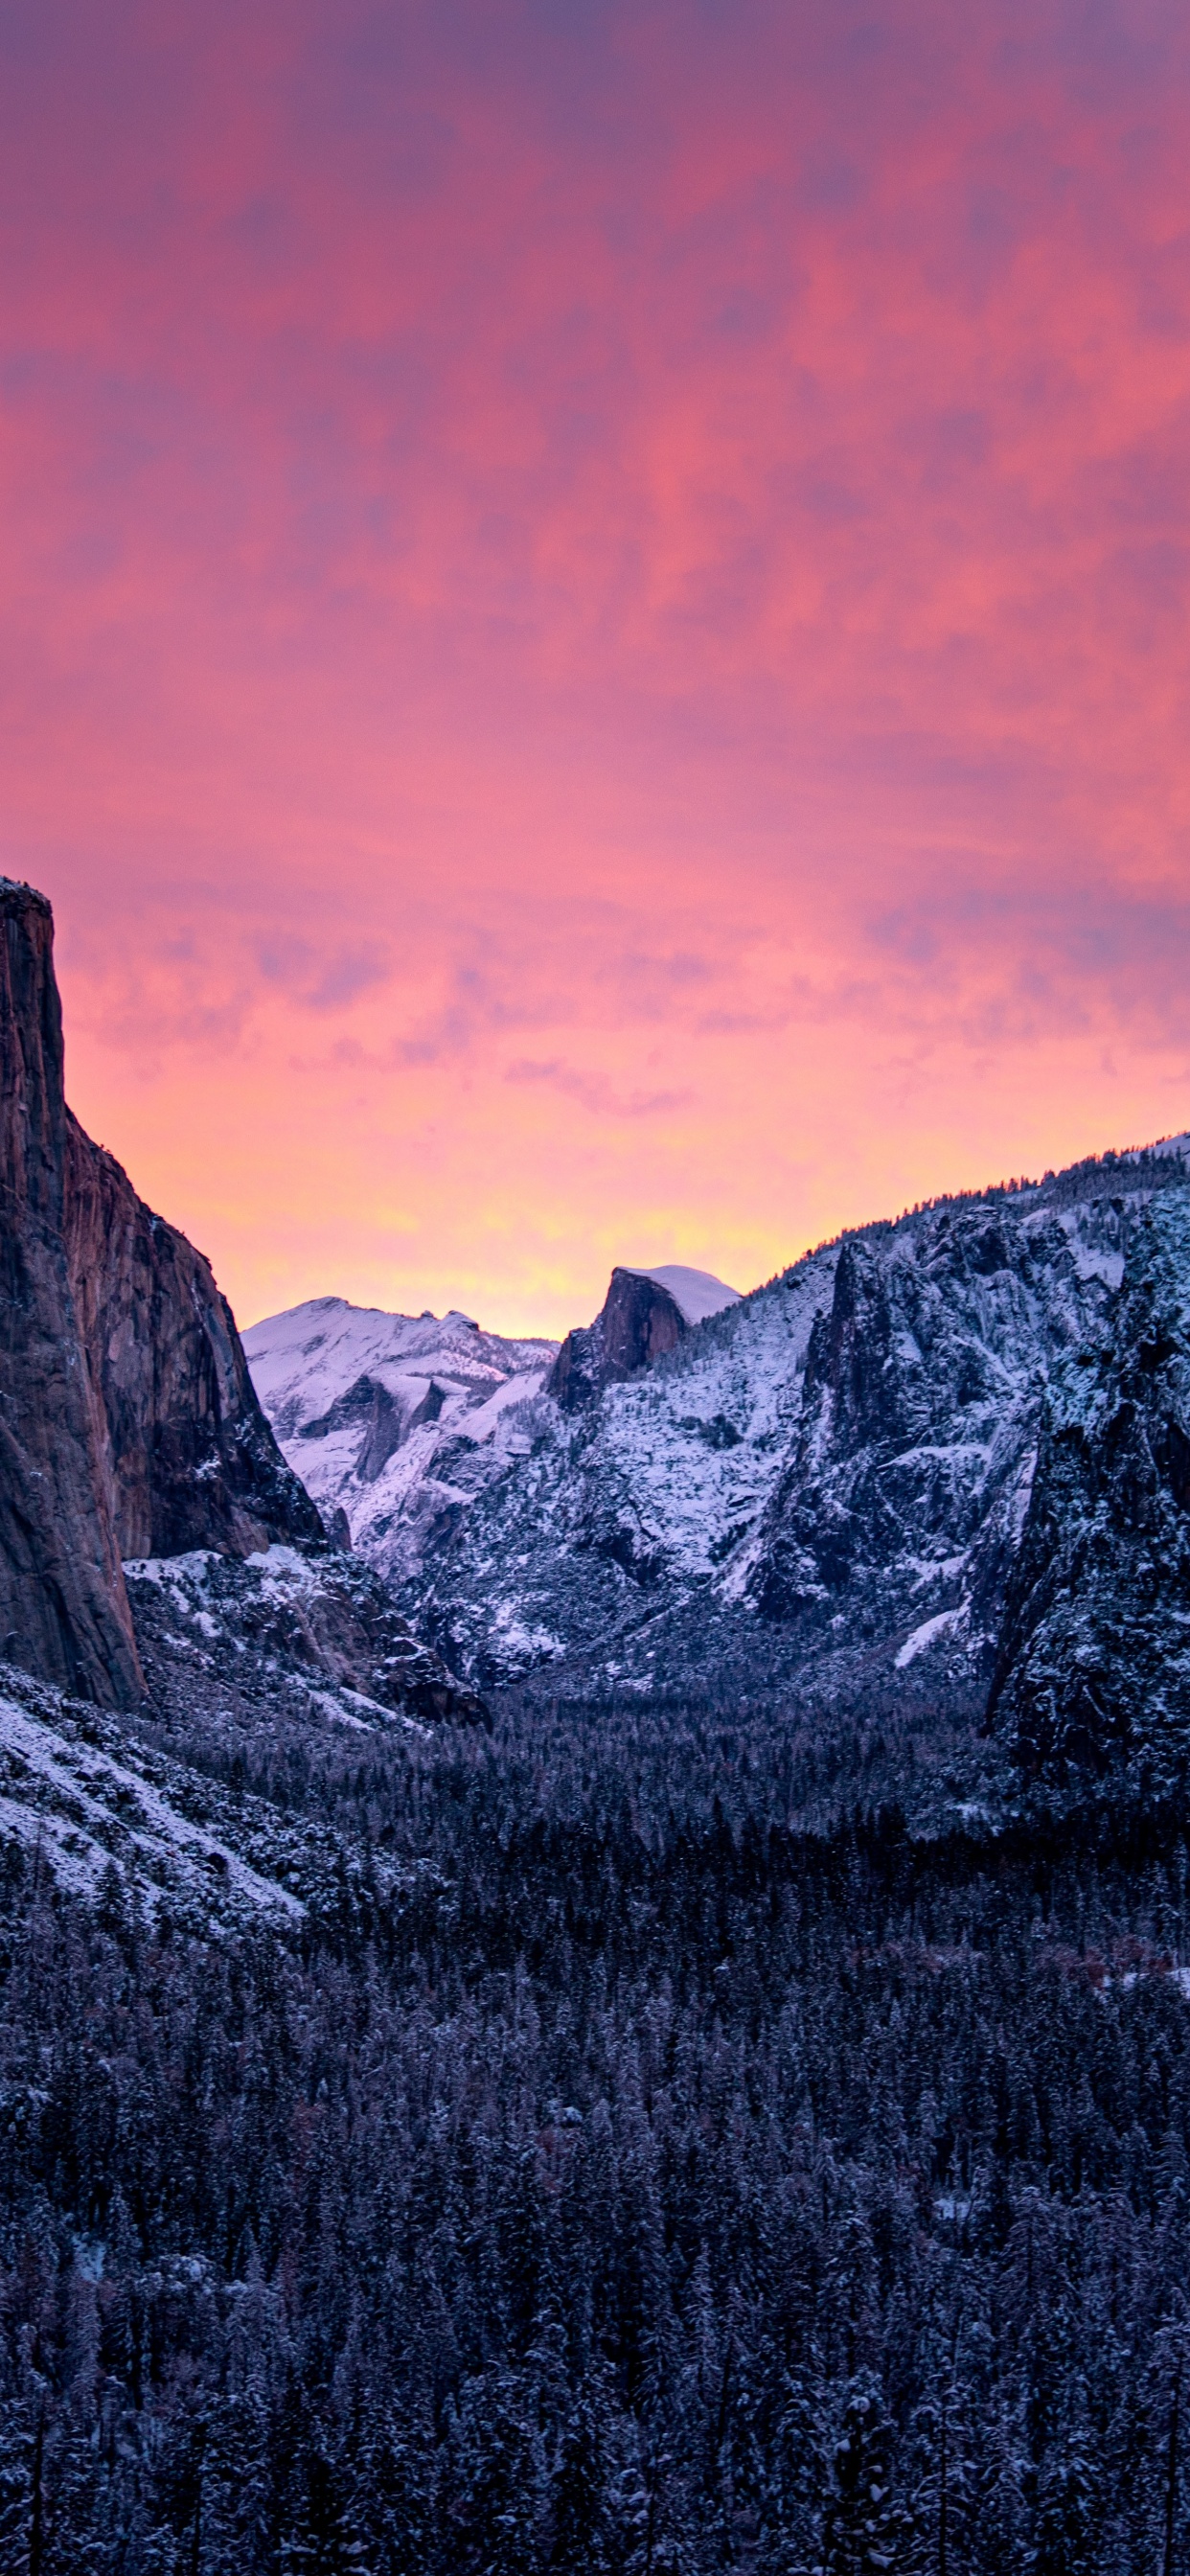 Free download the Winter Sunrise in Yosemite wallpaper beaty your iphone   nature mountain snow  Yosemite wallpaper Iphone wallpaper winter  Nature wallpaper